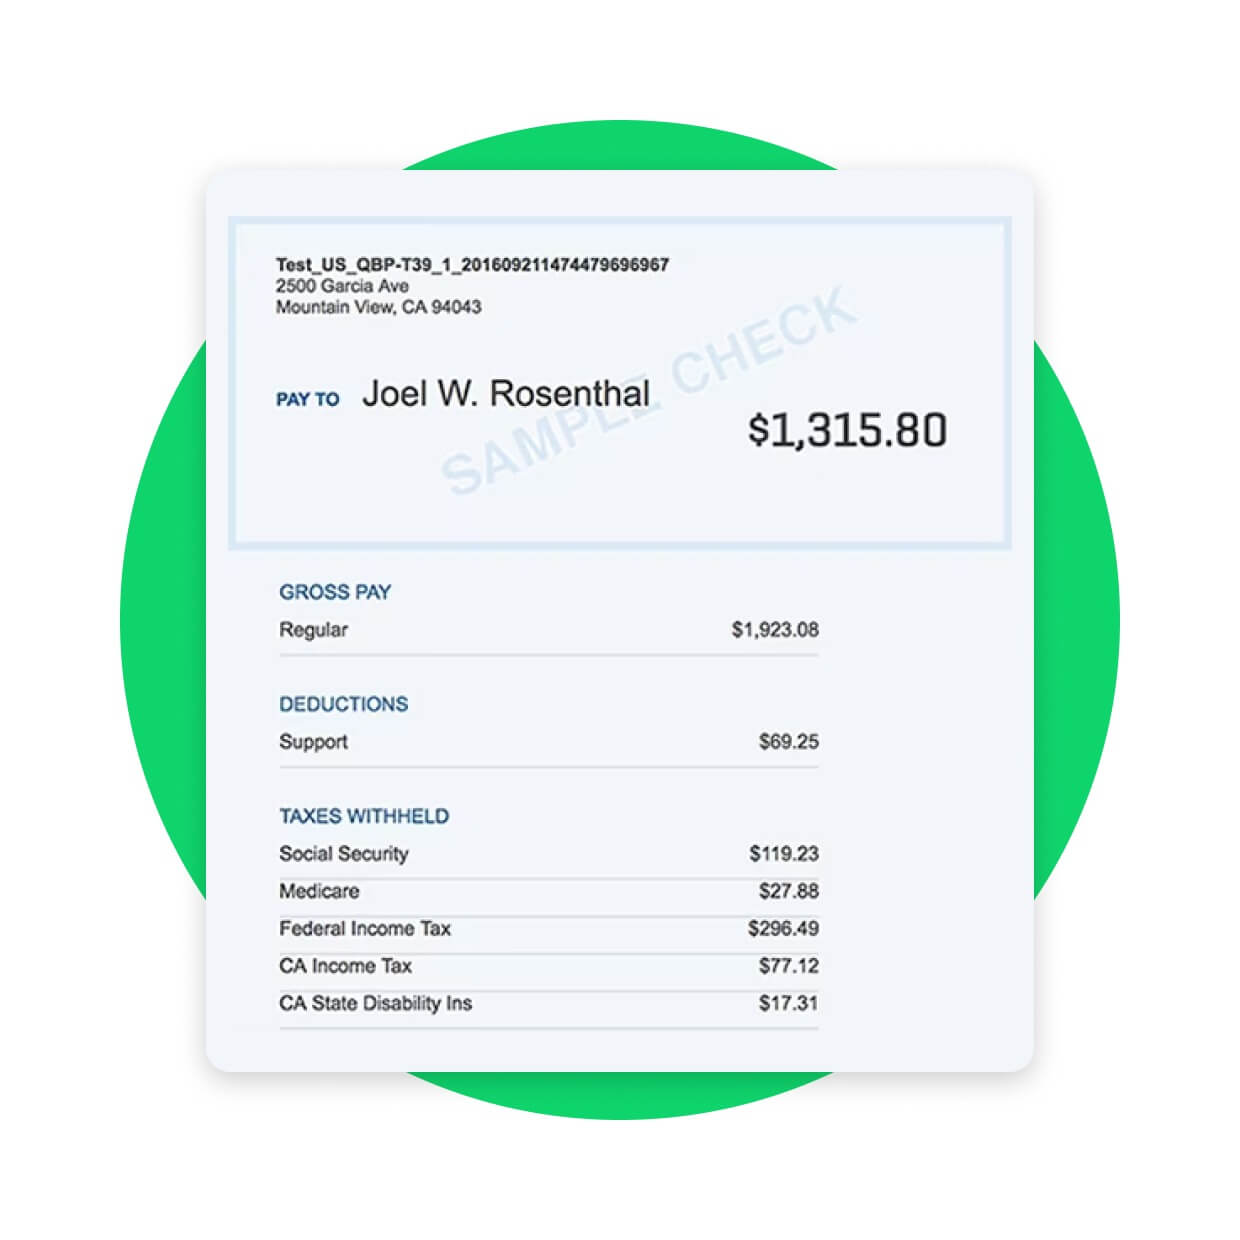 Use QuickBooks to print checks and send them off for payment.